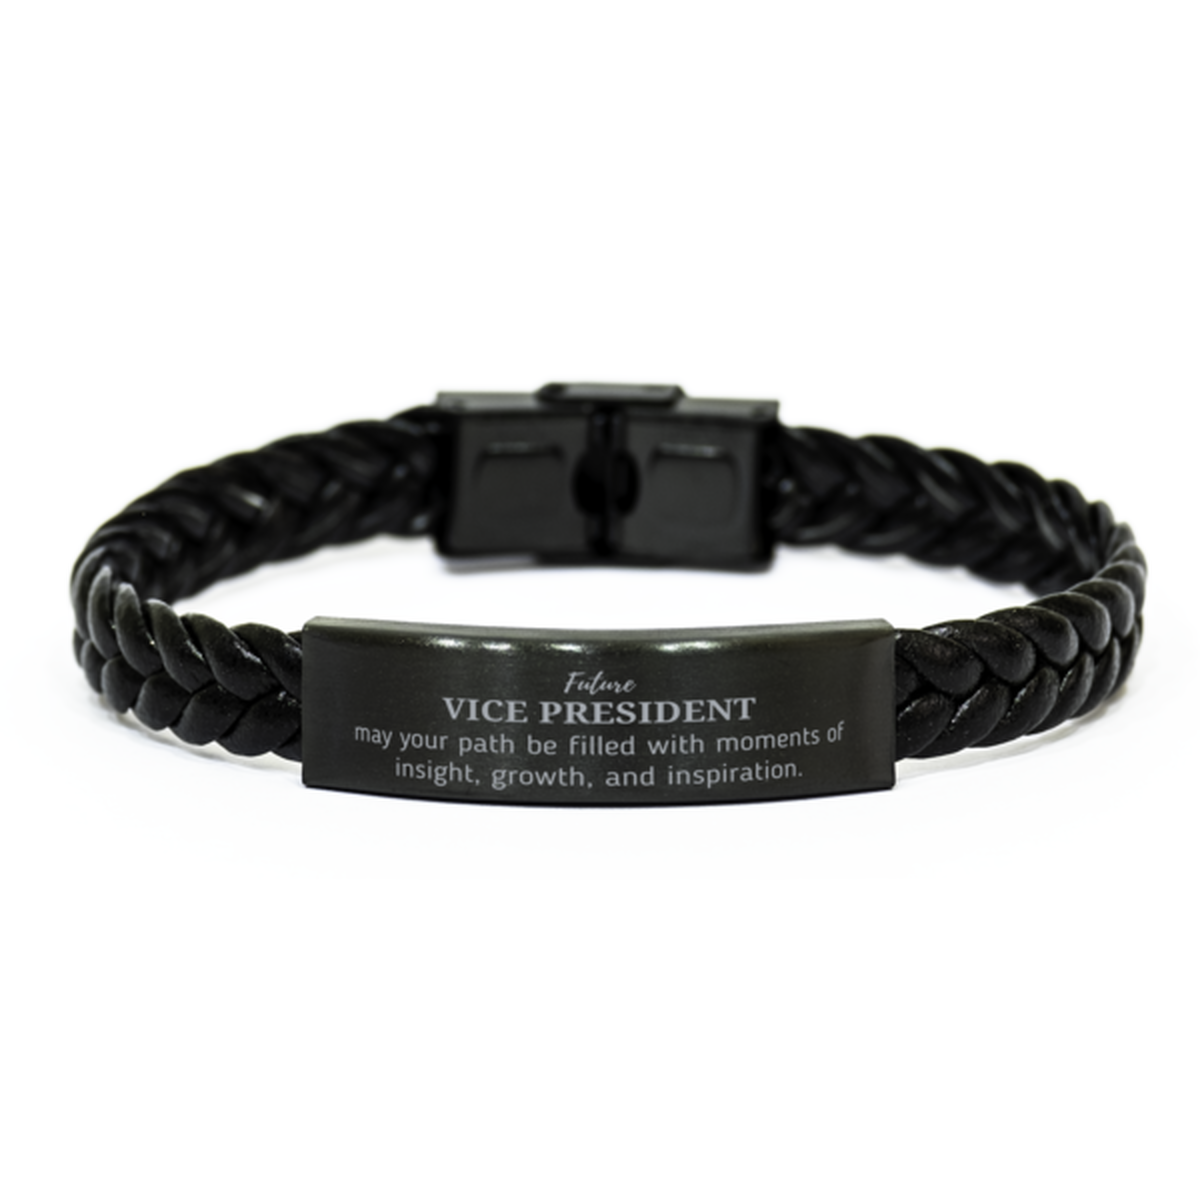 Future Vice President Gifts, May your path be filled with moments of insight, Graduation Gifts for New Vice President, Christmas Unique Braided Leather Bracelet For Men, Women, Friends